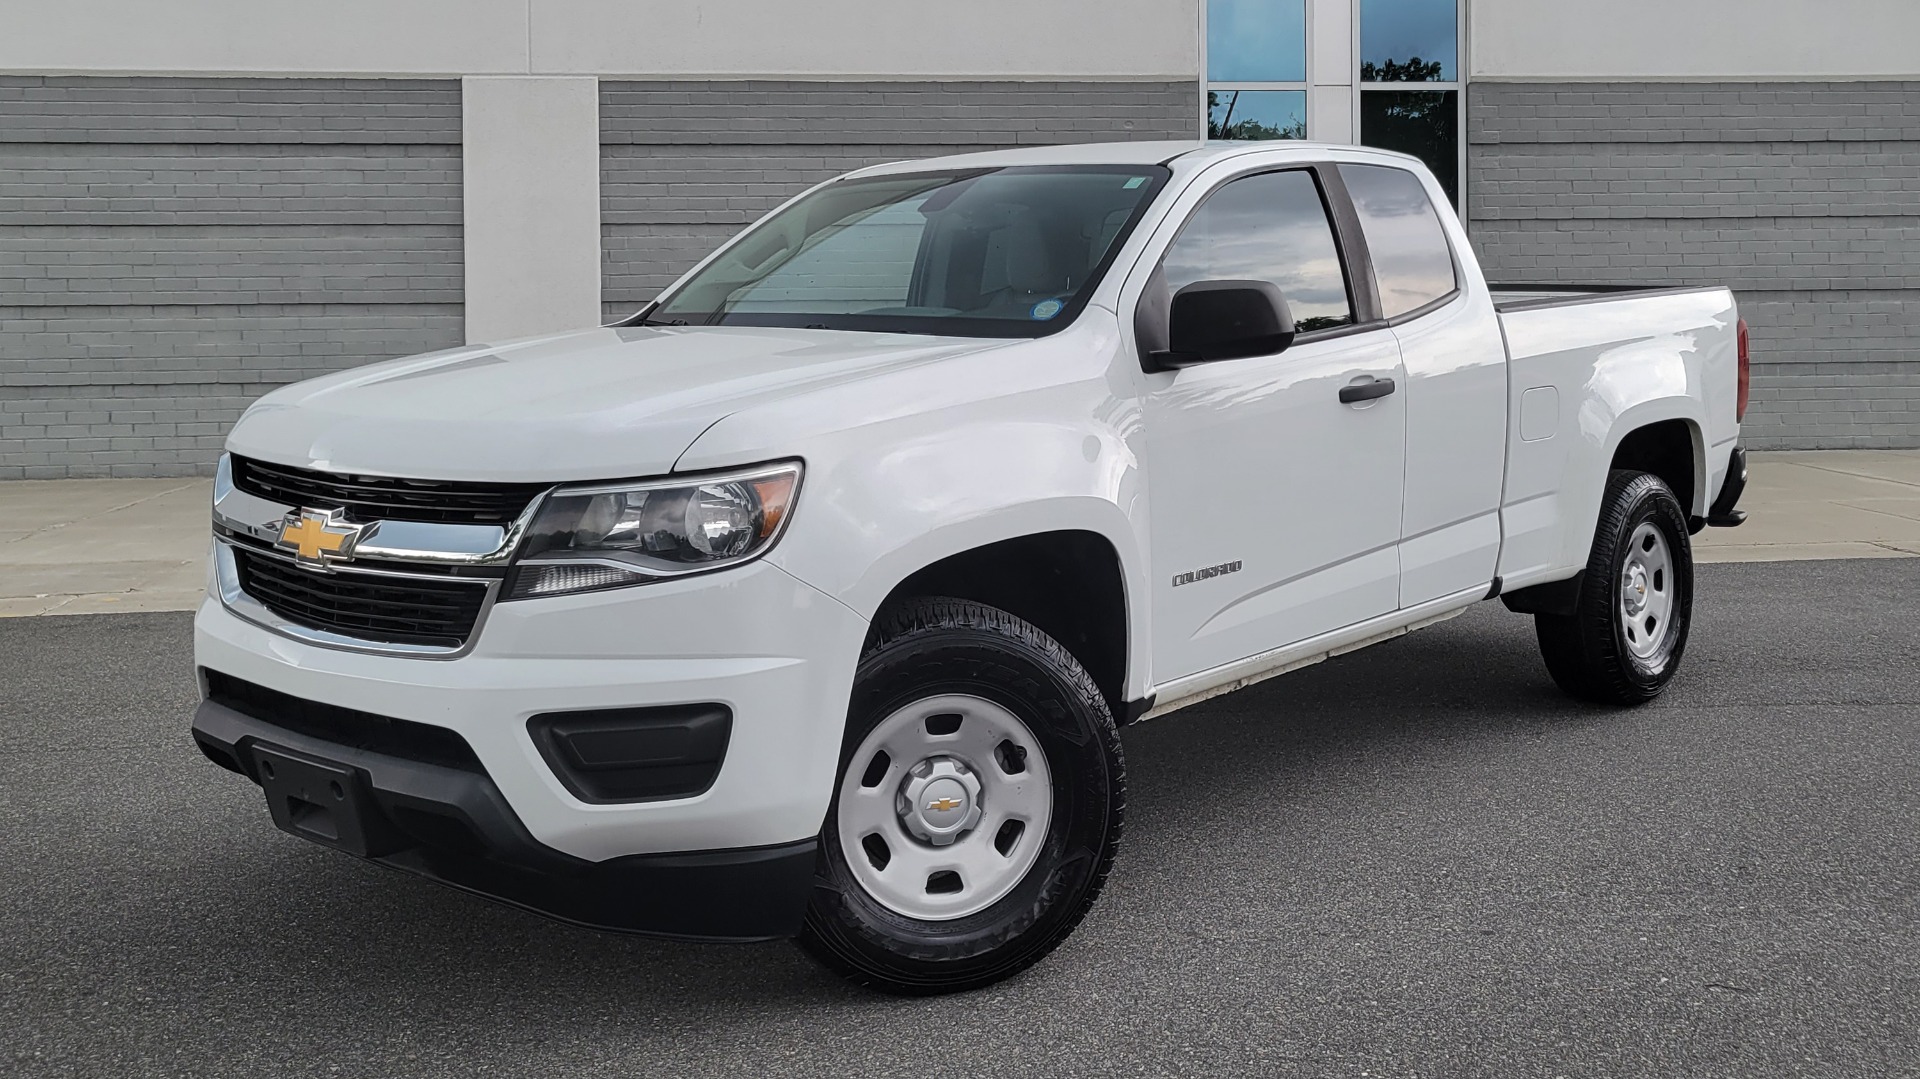 Used 2018 Chevrolet COLORADO EXT CAB / 2.5L / 2WD / 6-SPD AUTO / WORK TRUCK / REARVIEW for sale $22,495 at Formula Imports in Charlotte NC 28227 1